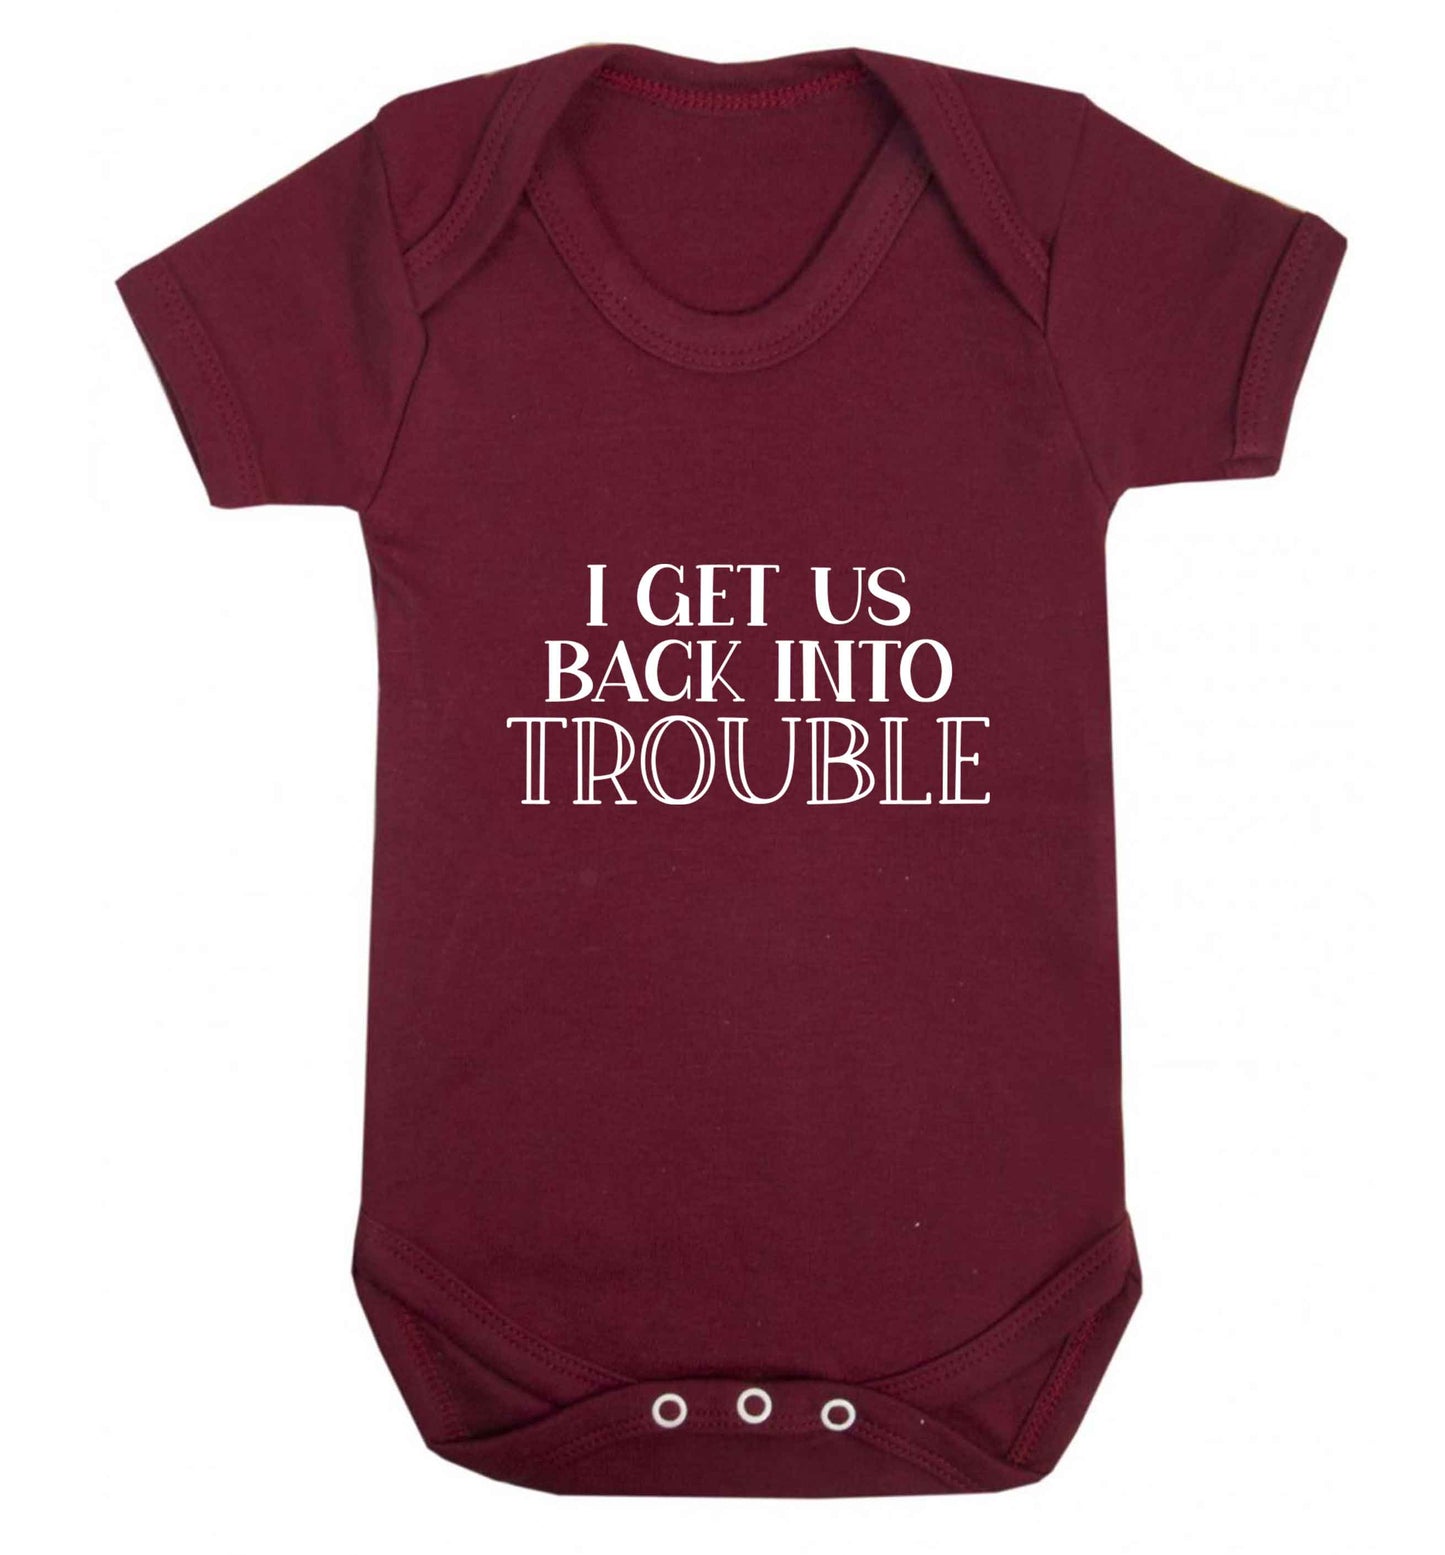 I get us back into trouble baby vest maroon 18-24 months